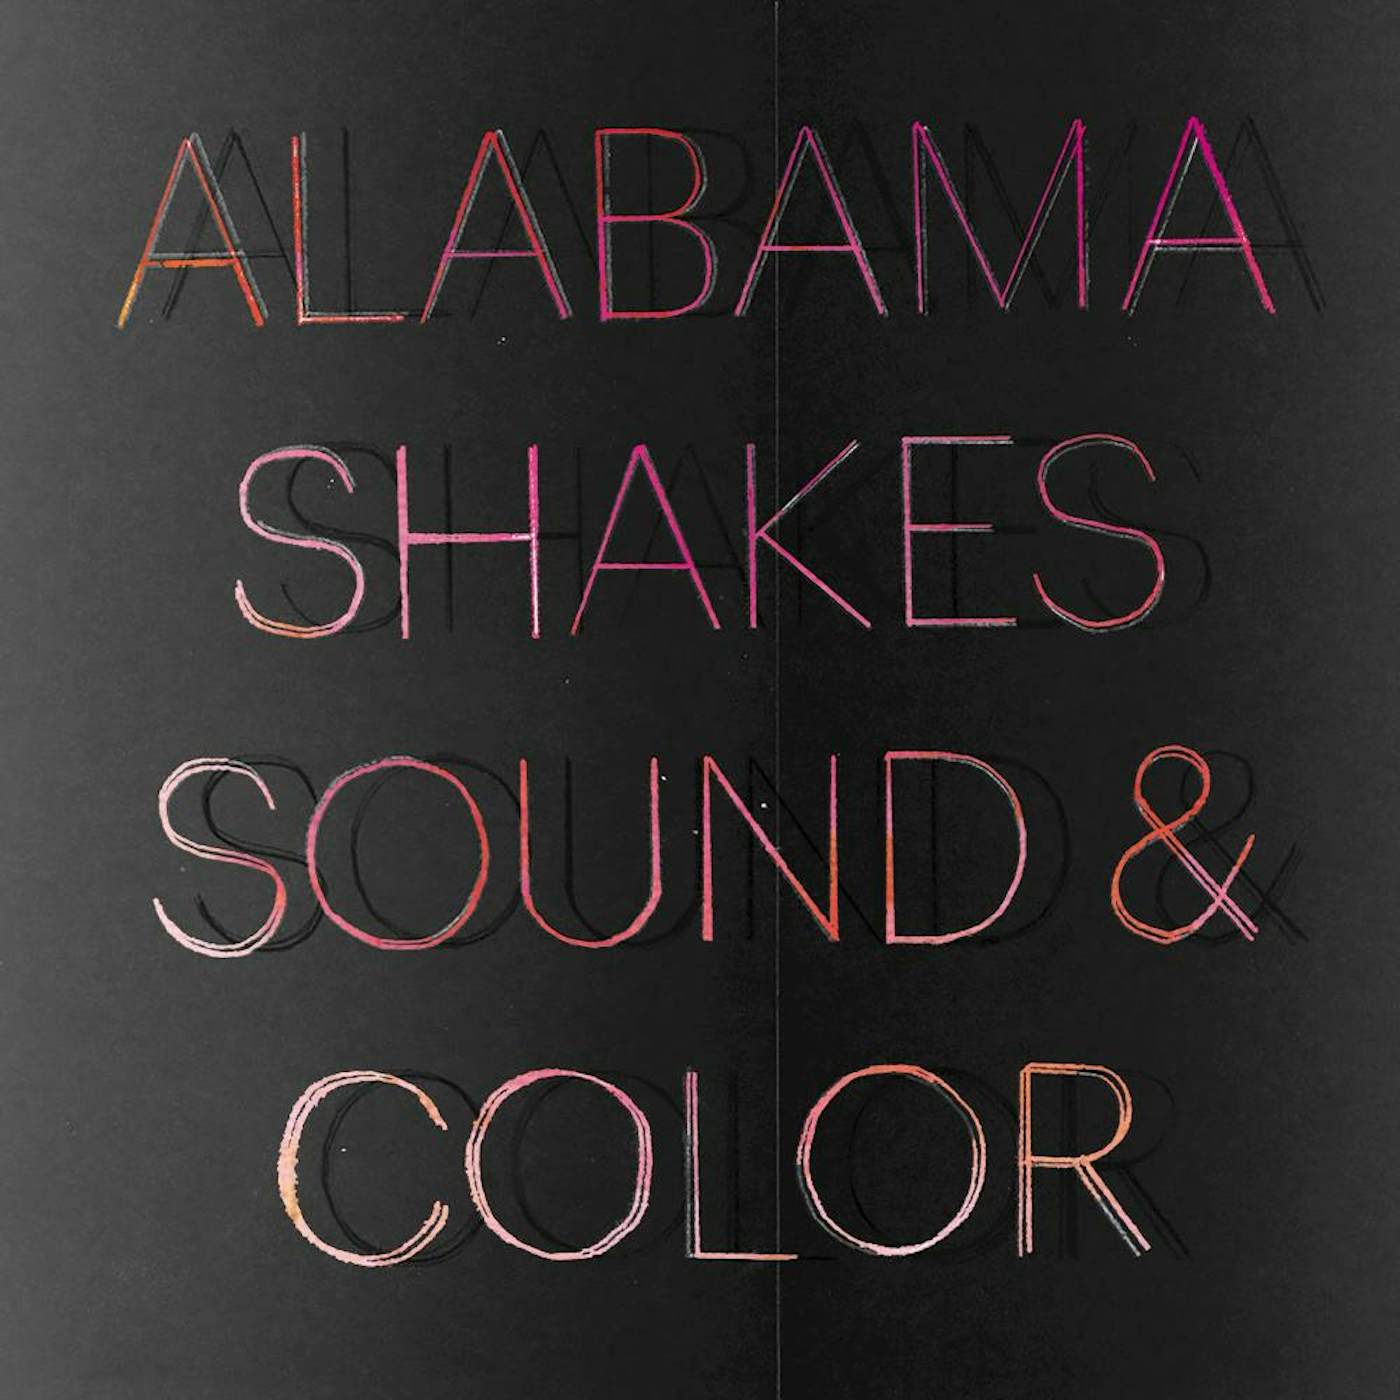 Alabama Shakes SOUND & COLOR (DELUXE) CD